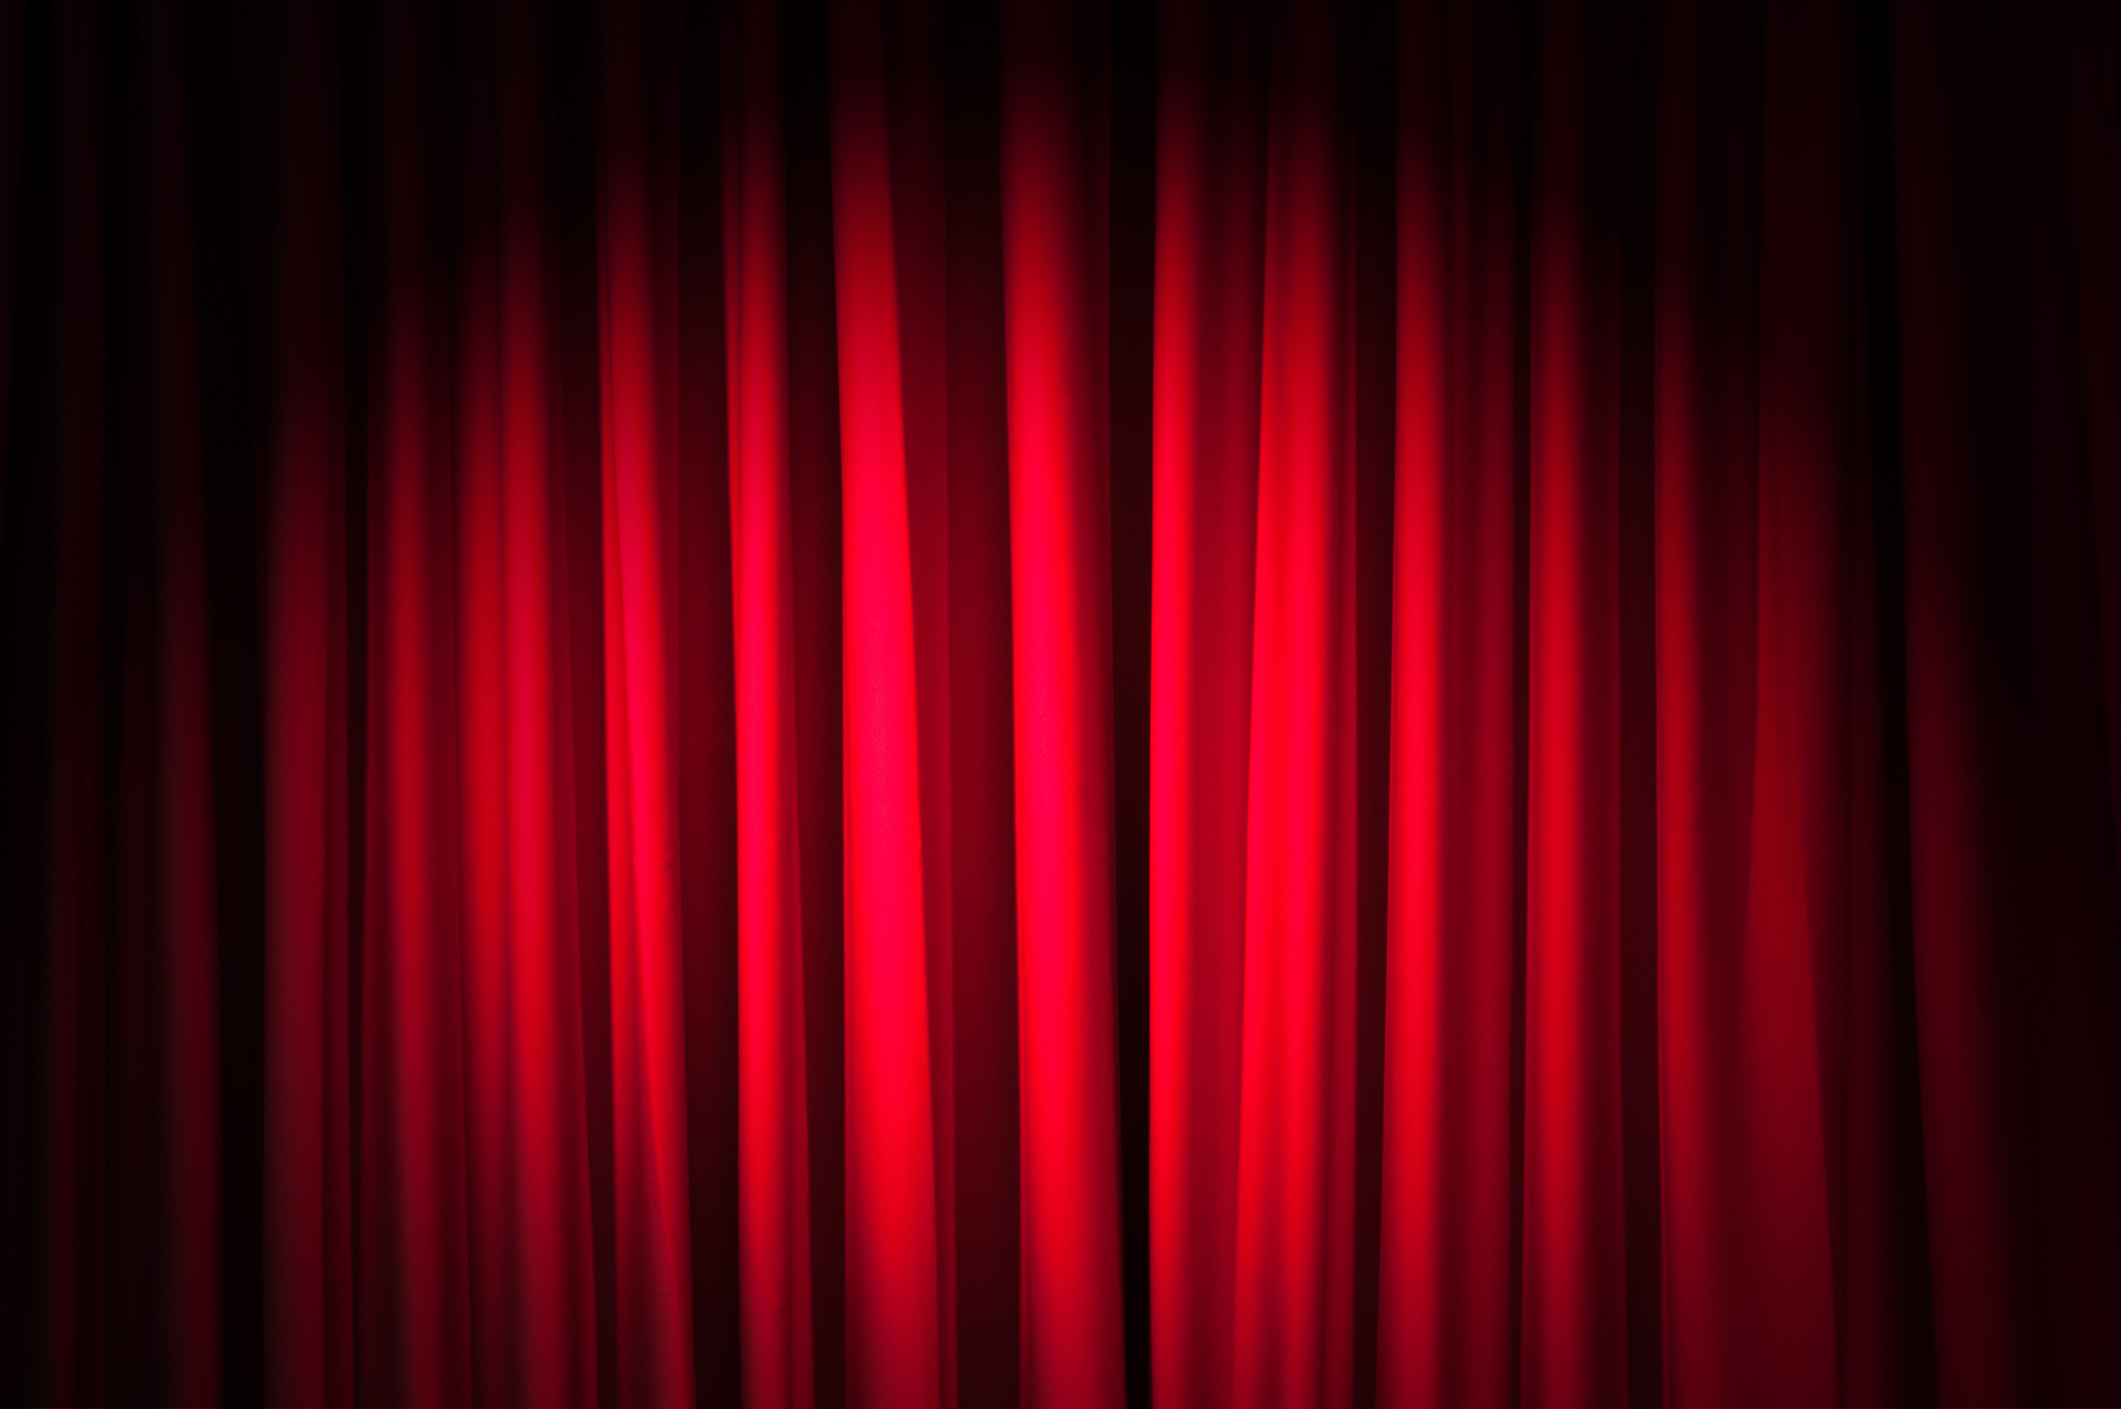 Brightly Lit Curtains in Theatre Concept